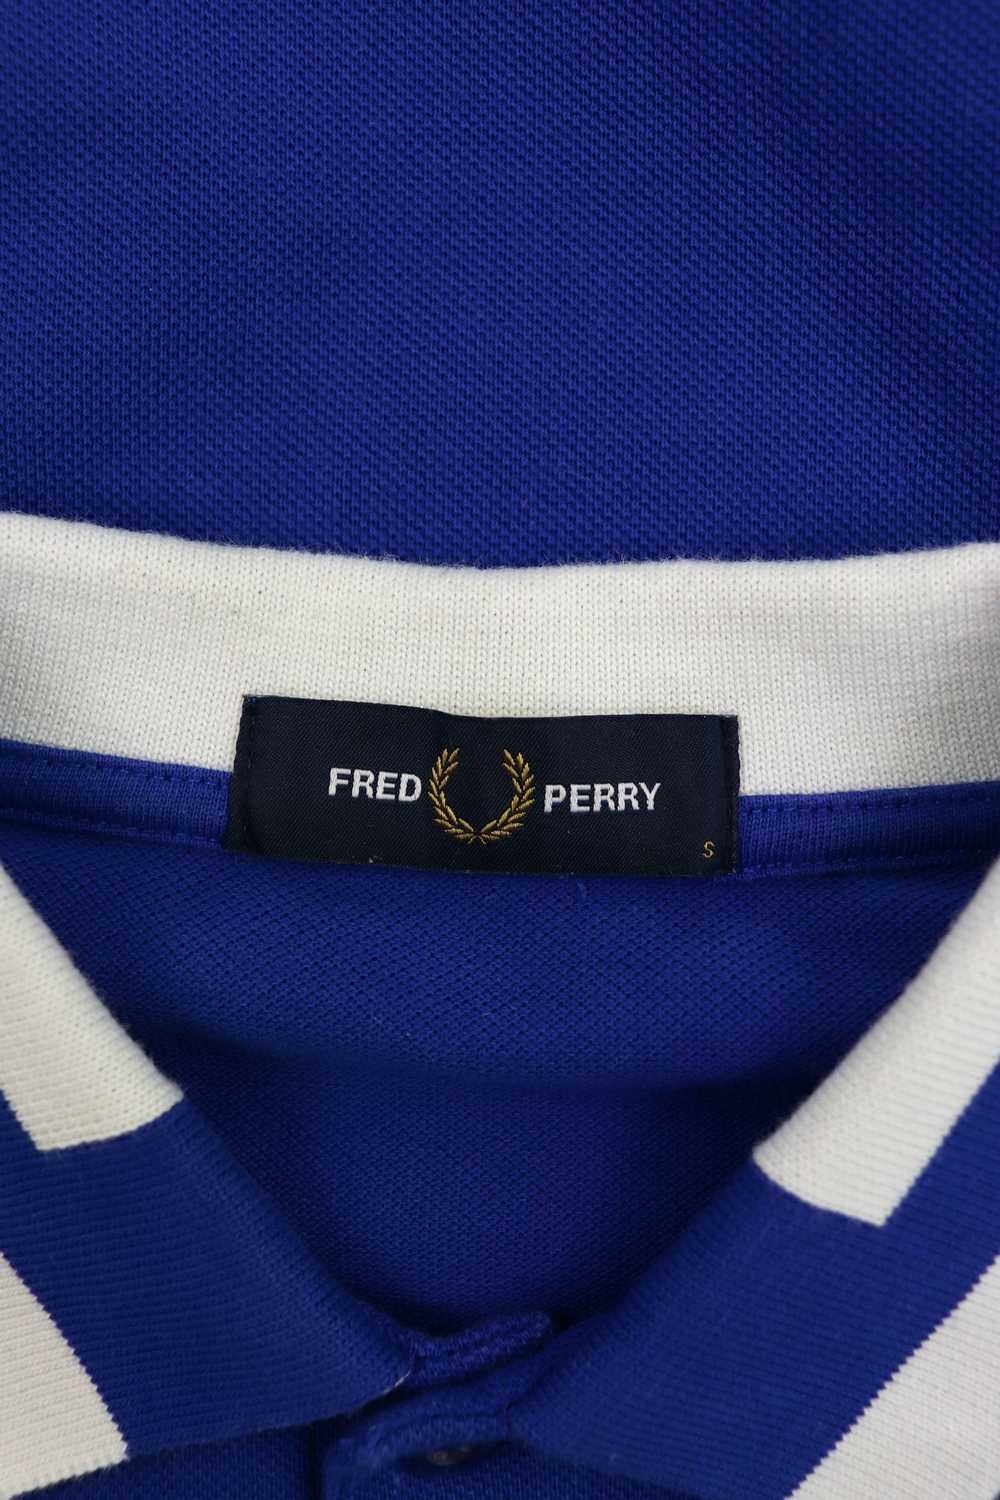 Fred Perry Fred Perry Dark Blue Polo T-shirt - image 6